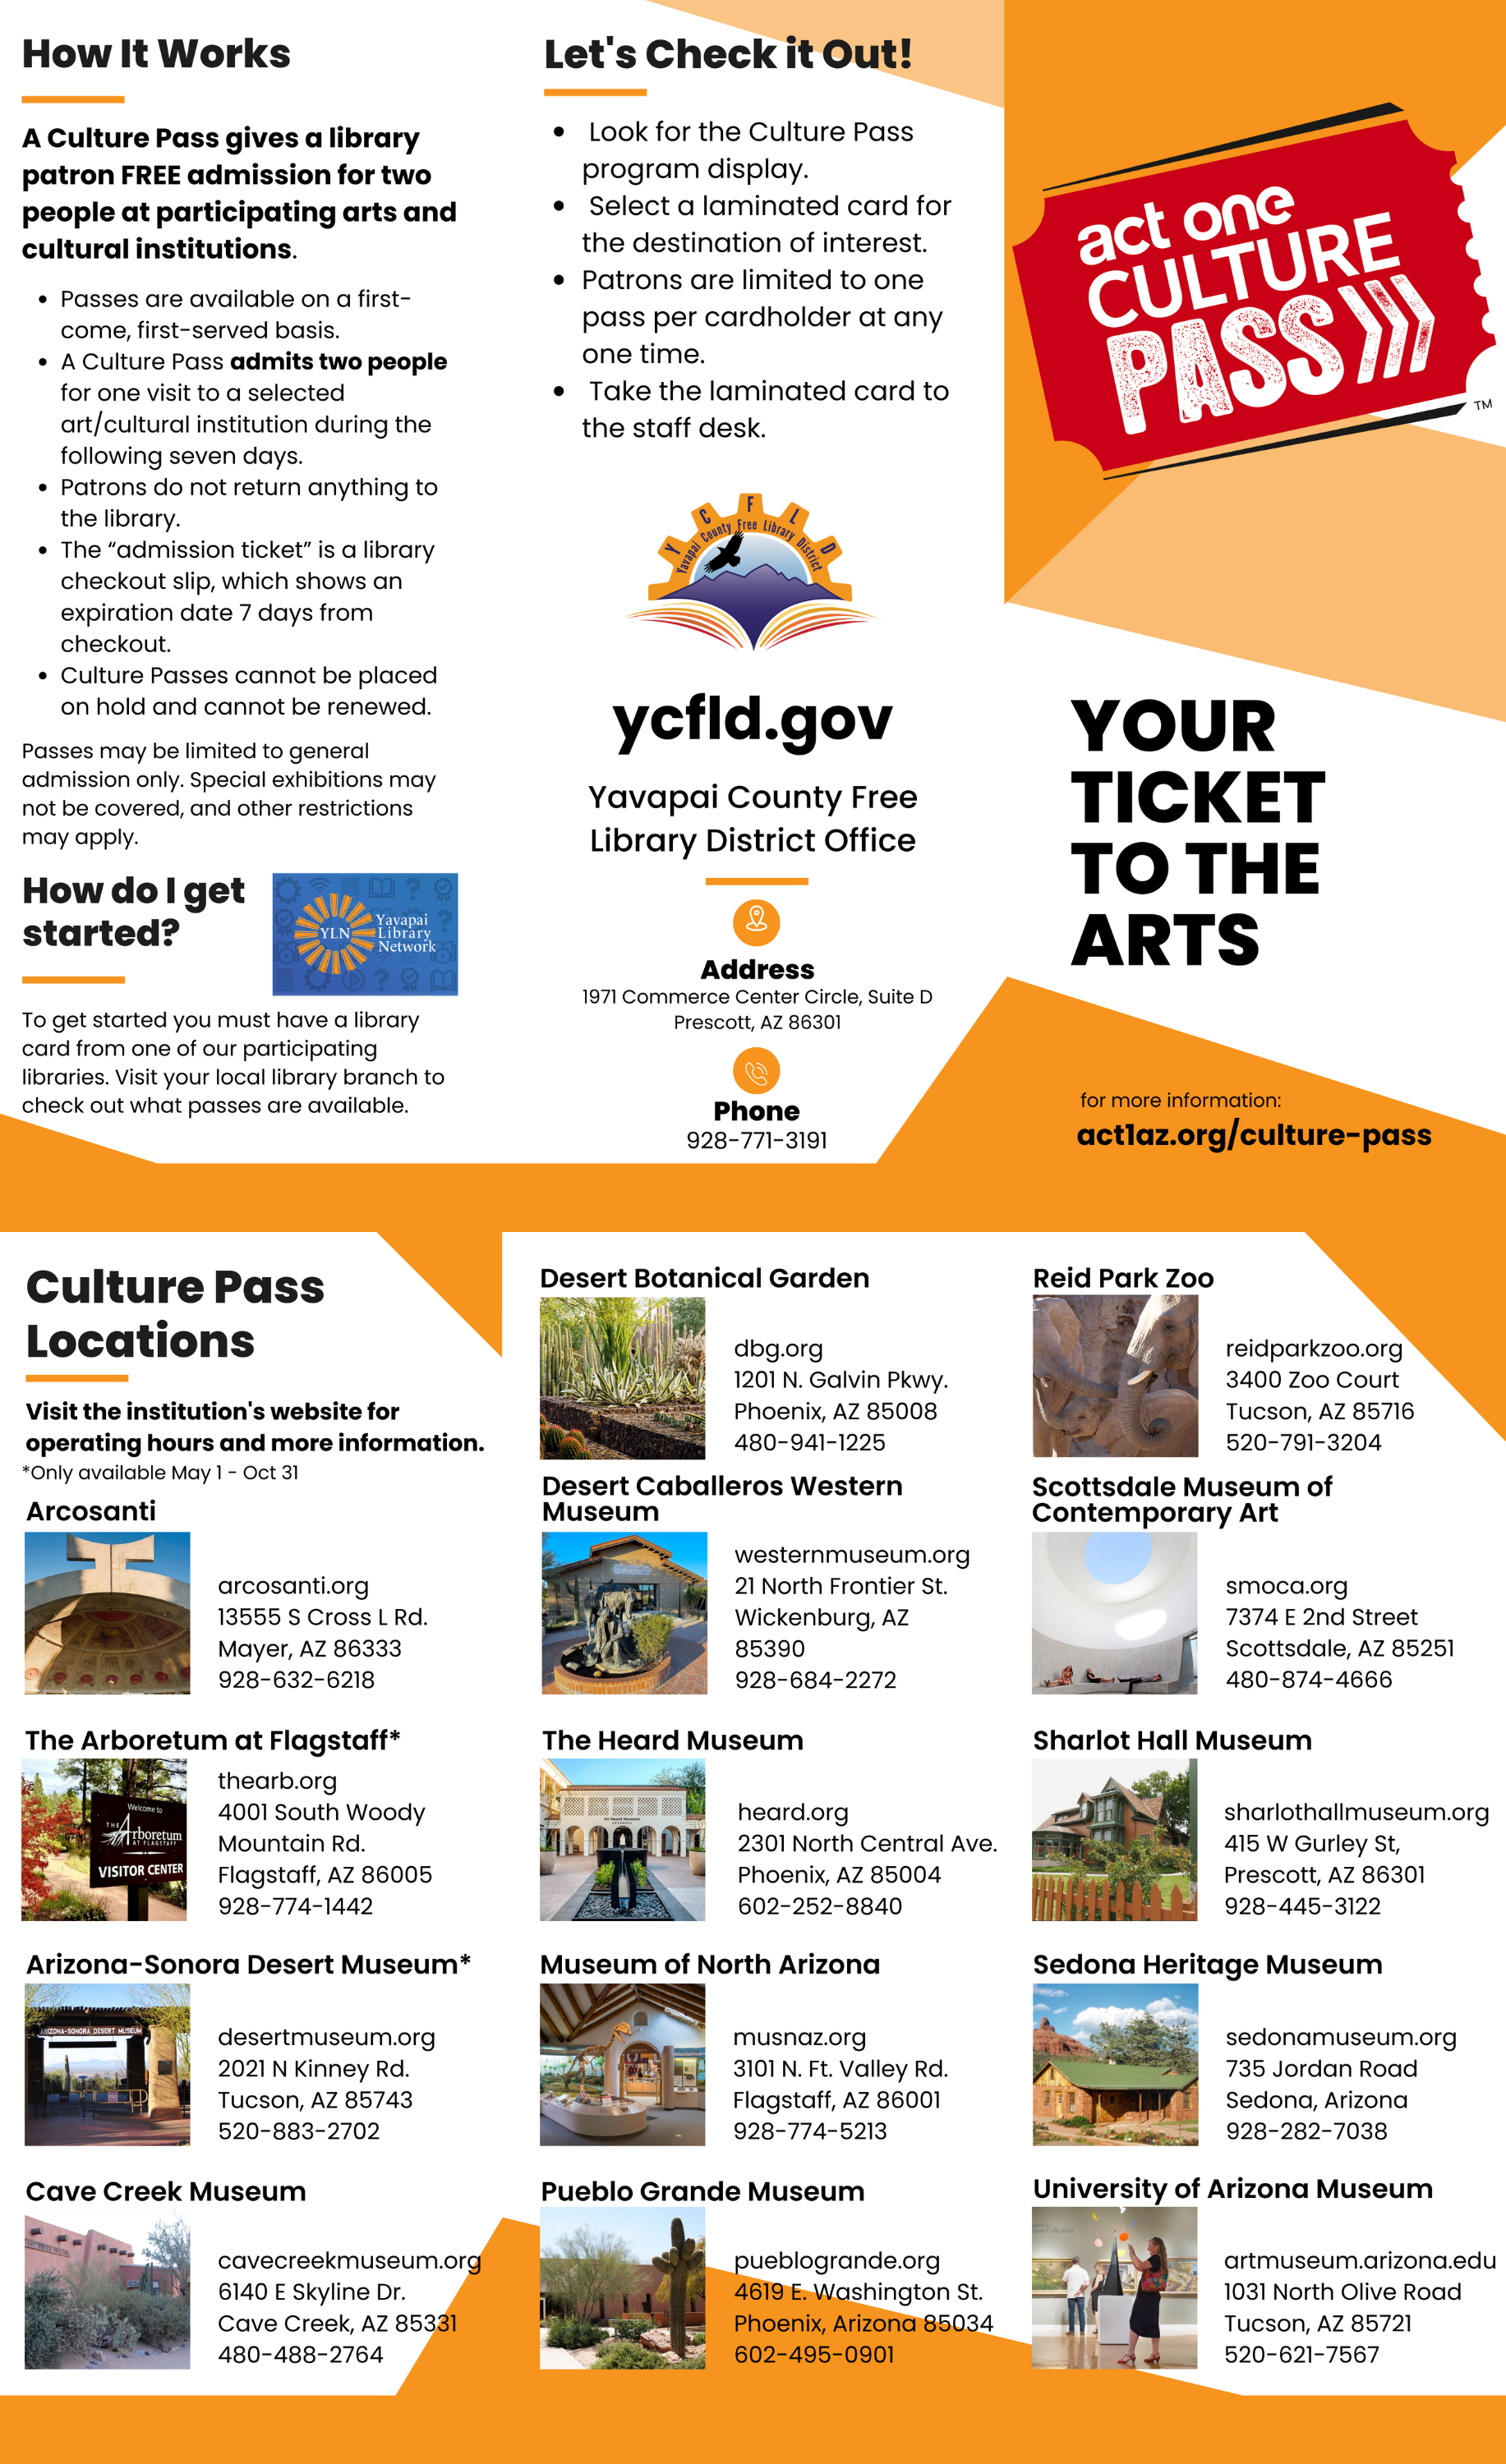 Culture Pass Information